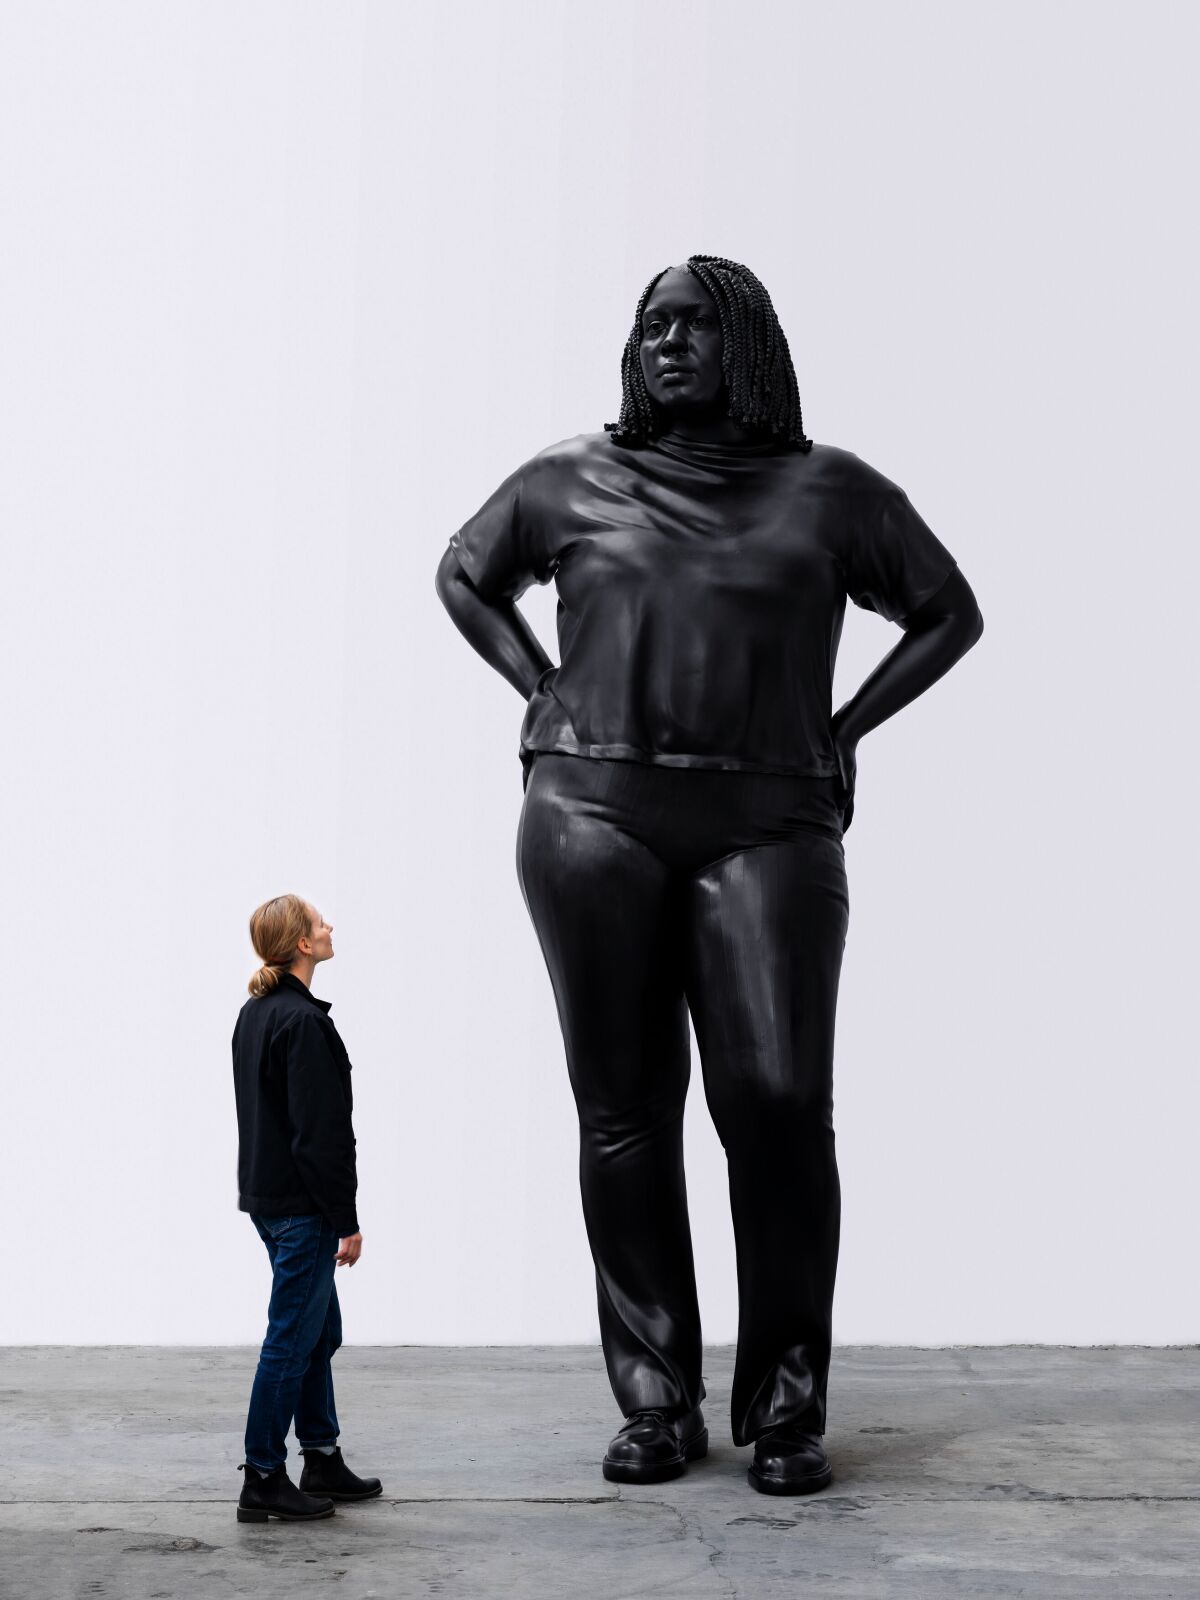 A museum-goer looking up at a huge bronze sculpture of a woman.